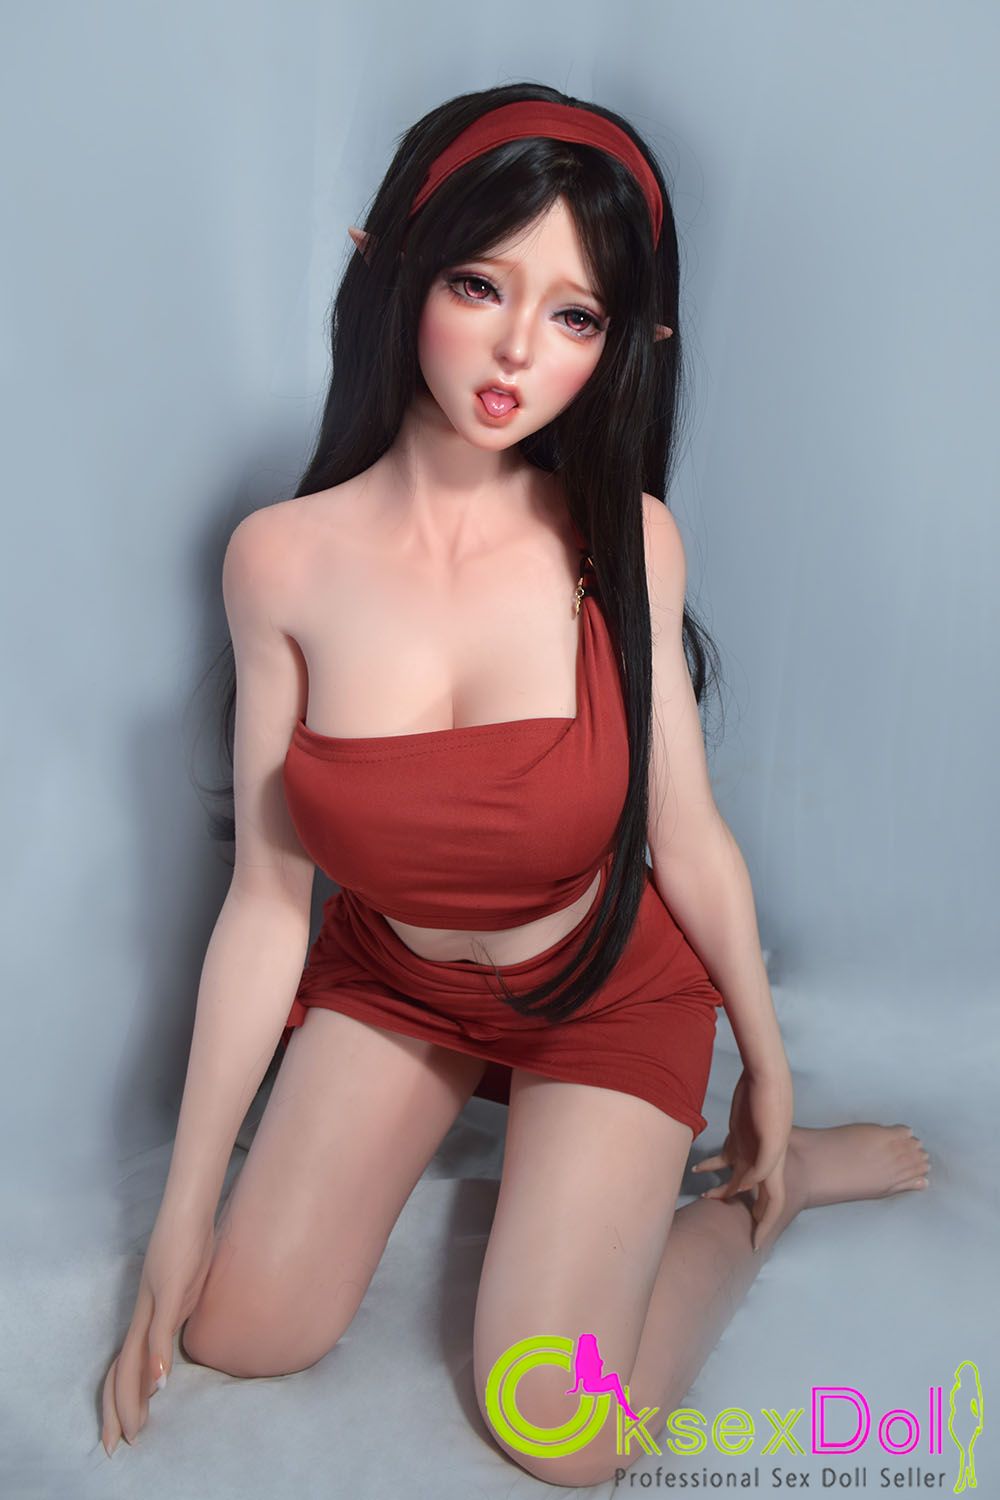 Giant Breast Silicone Love Dolls Photos